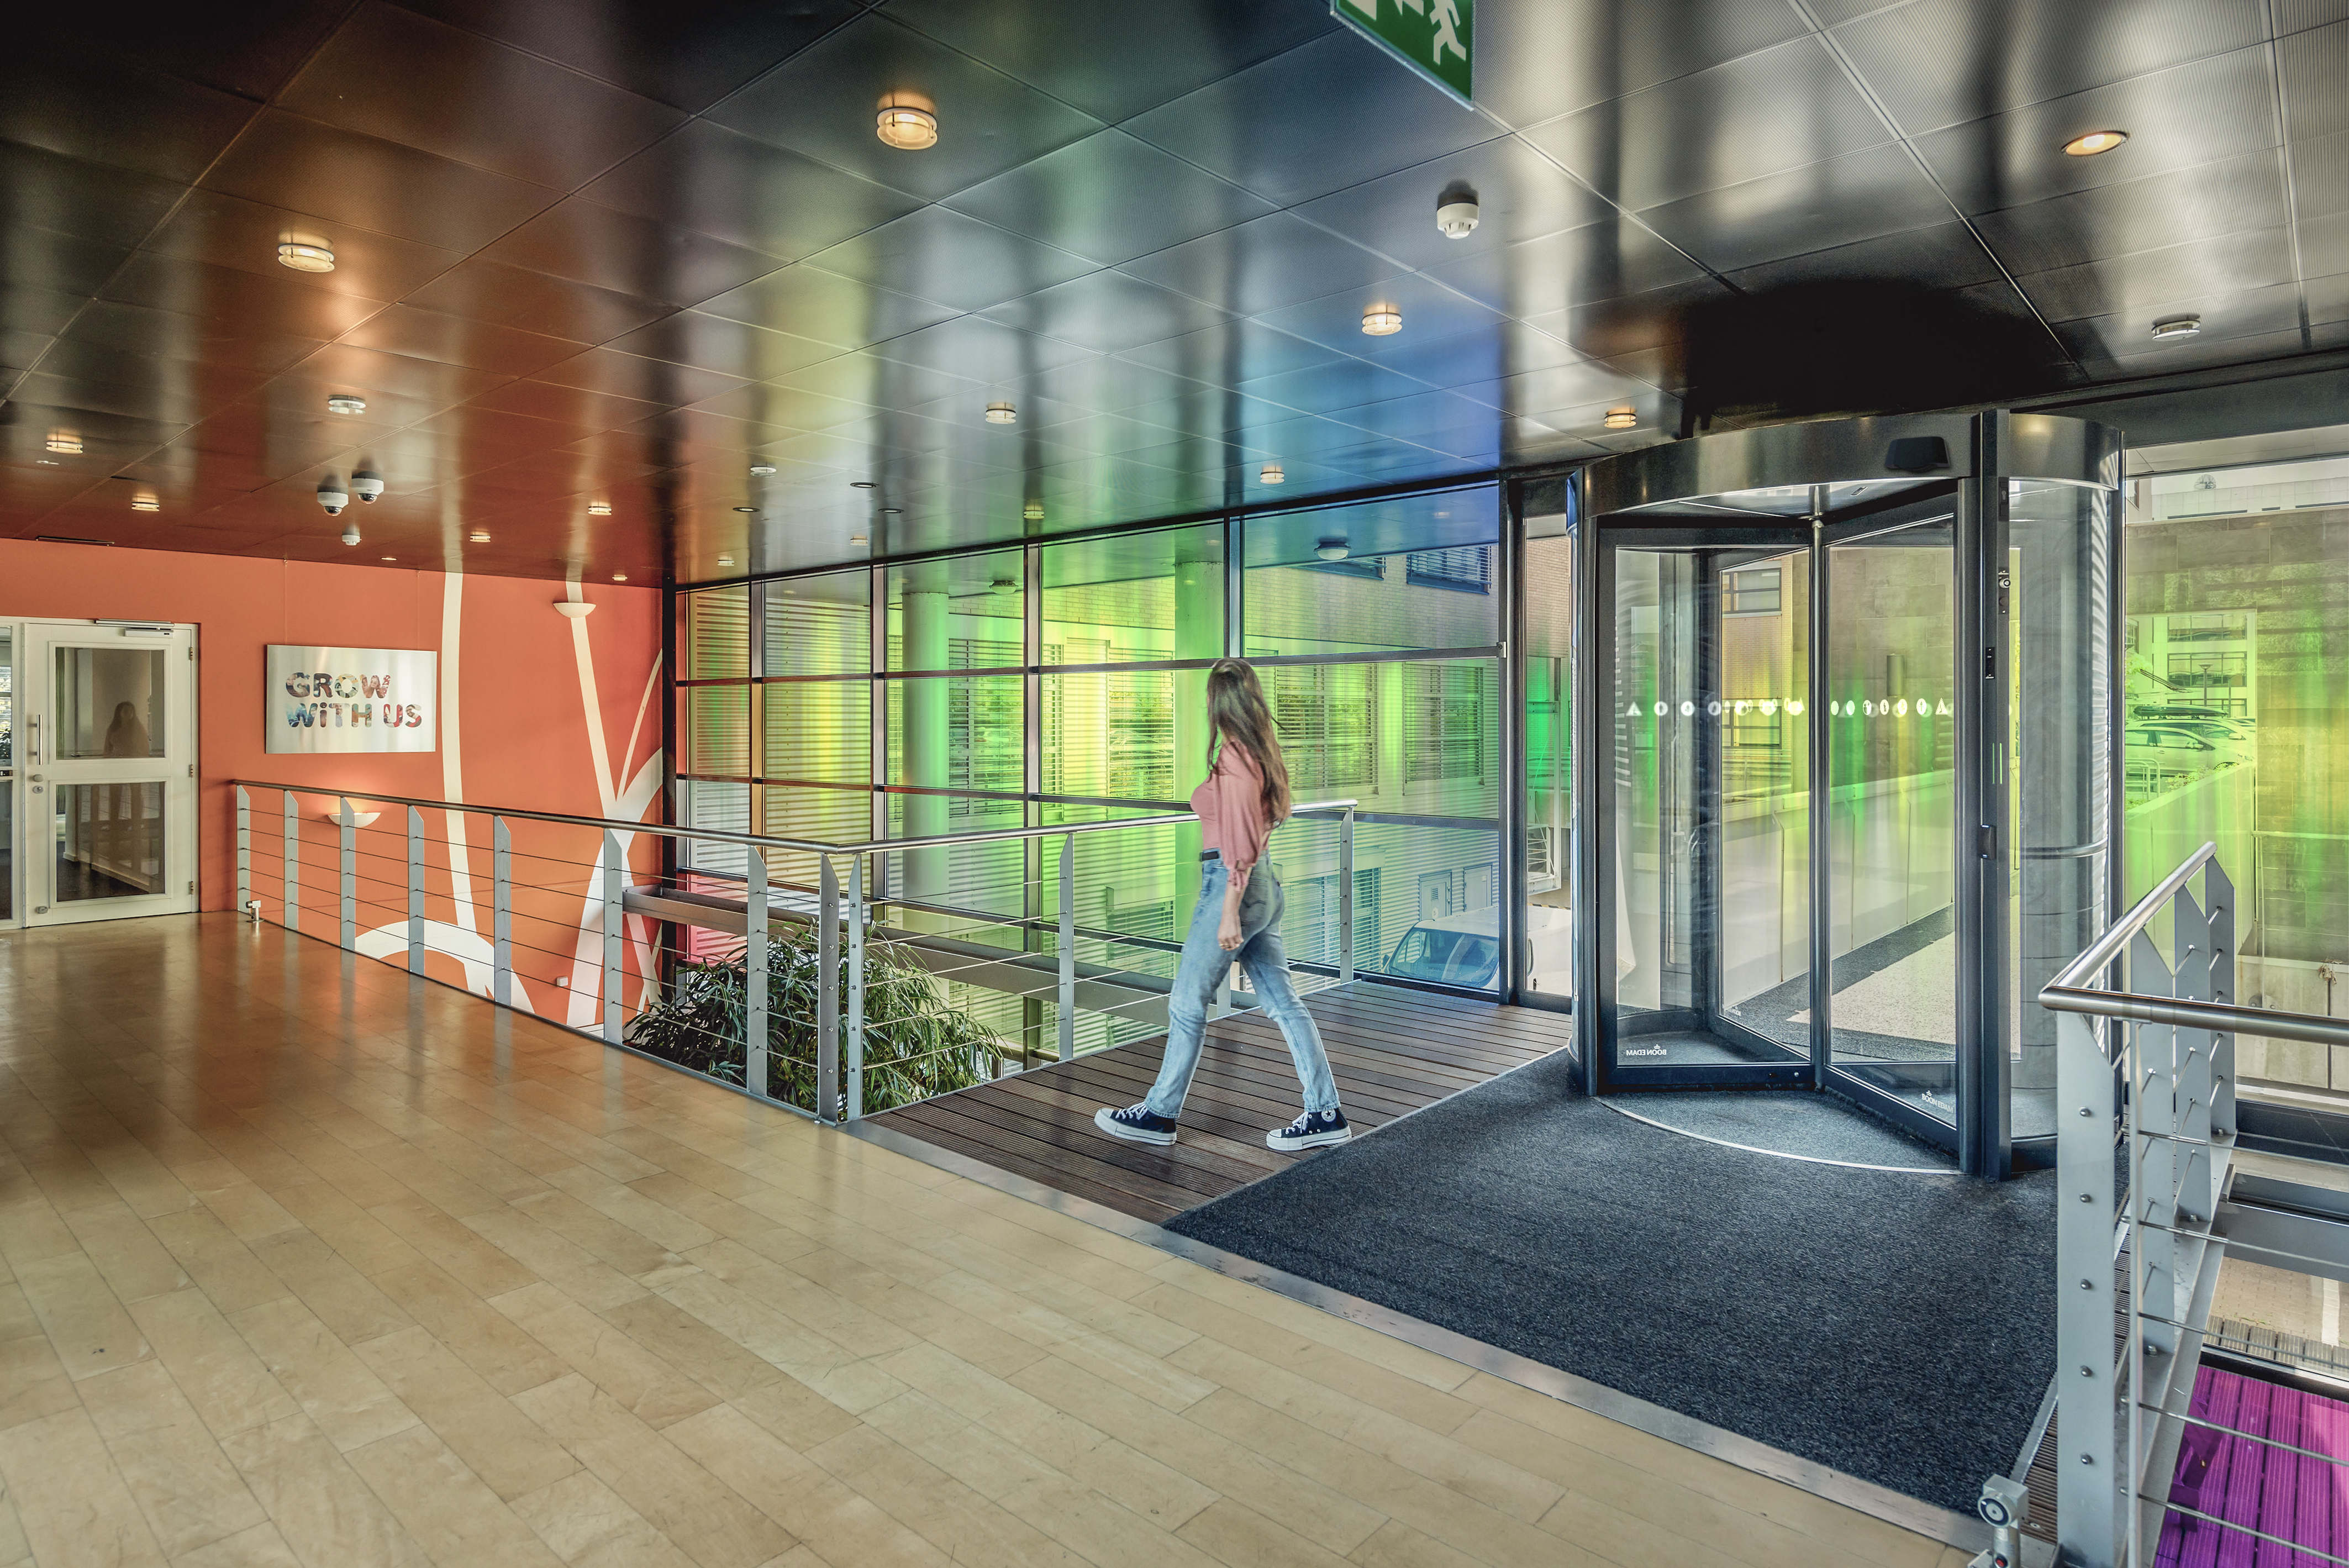 Boon Edam upgrades its high security revolving doors to be EN 17352 compliant